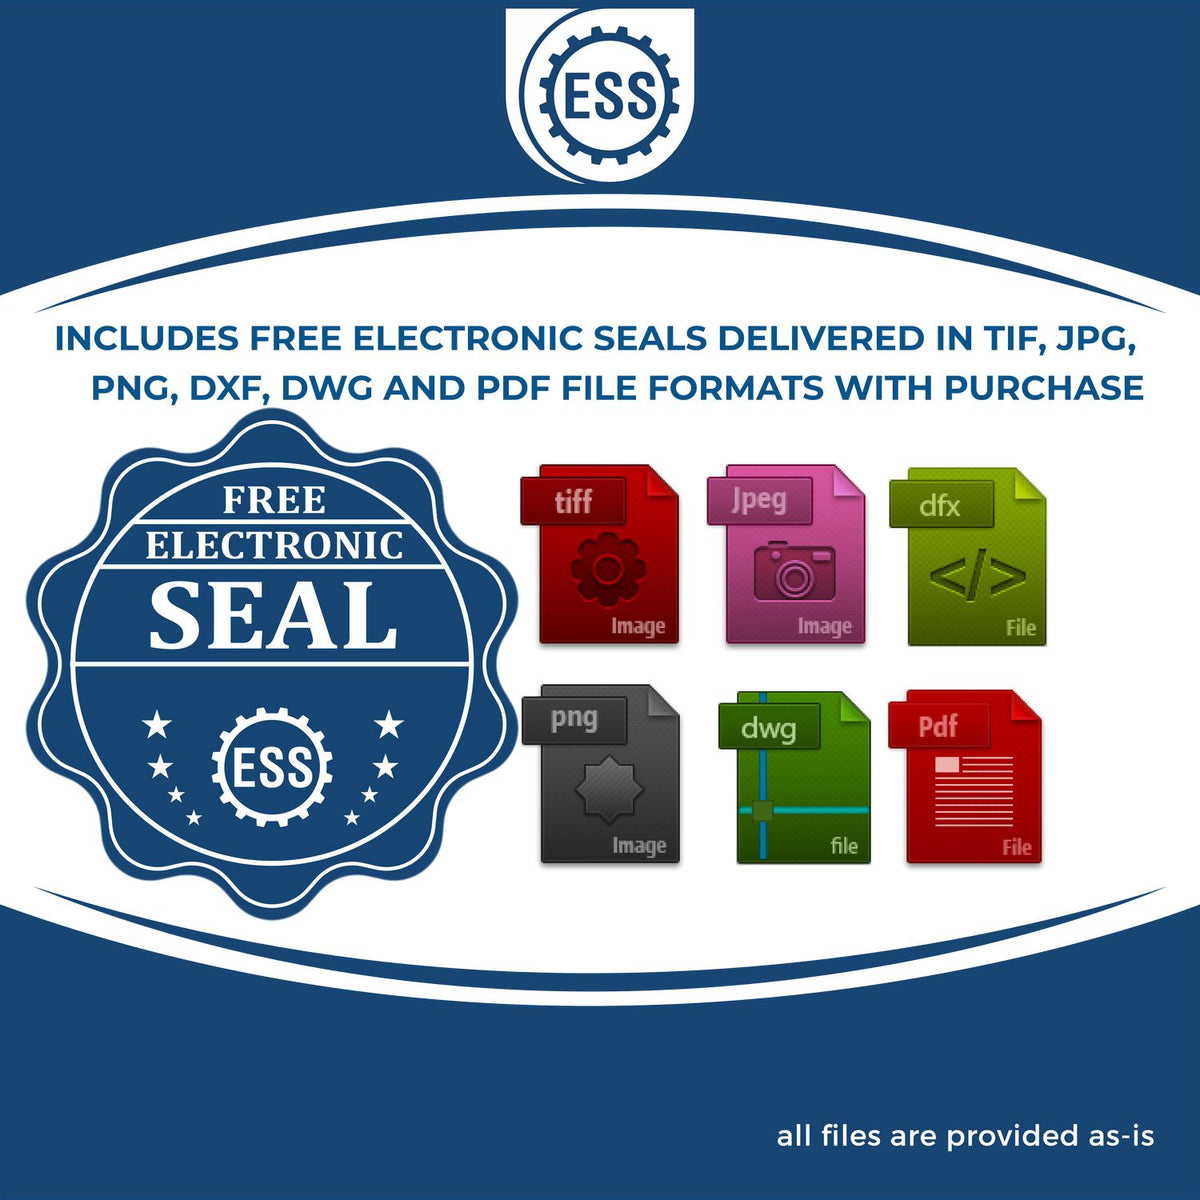 An infographic for the free electronic seal for the Slim Pre-Inked Oklahoma Professional Engineer Seal Stamp illustrating the different file type icons such as DXF, DWG, TIF, JPG and PNG.